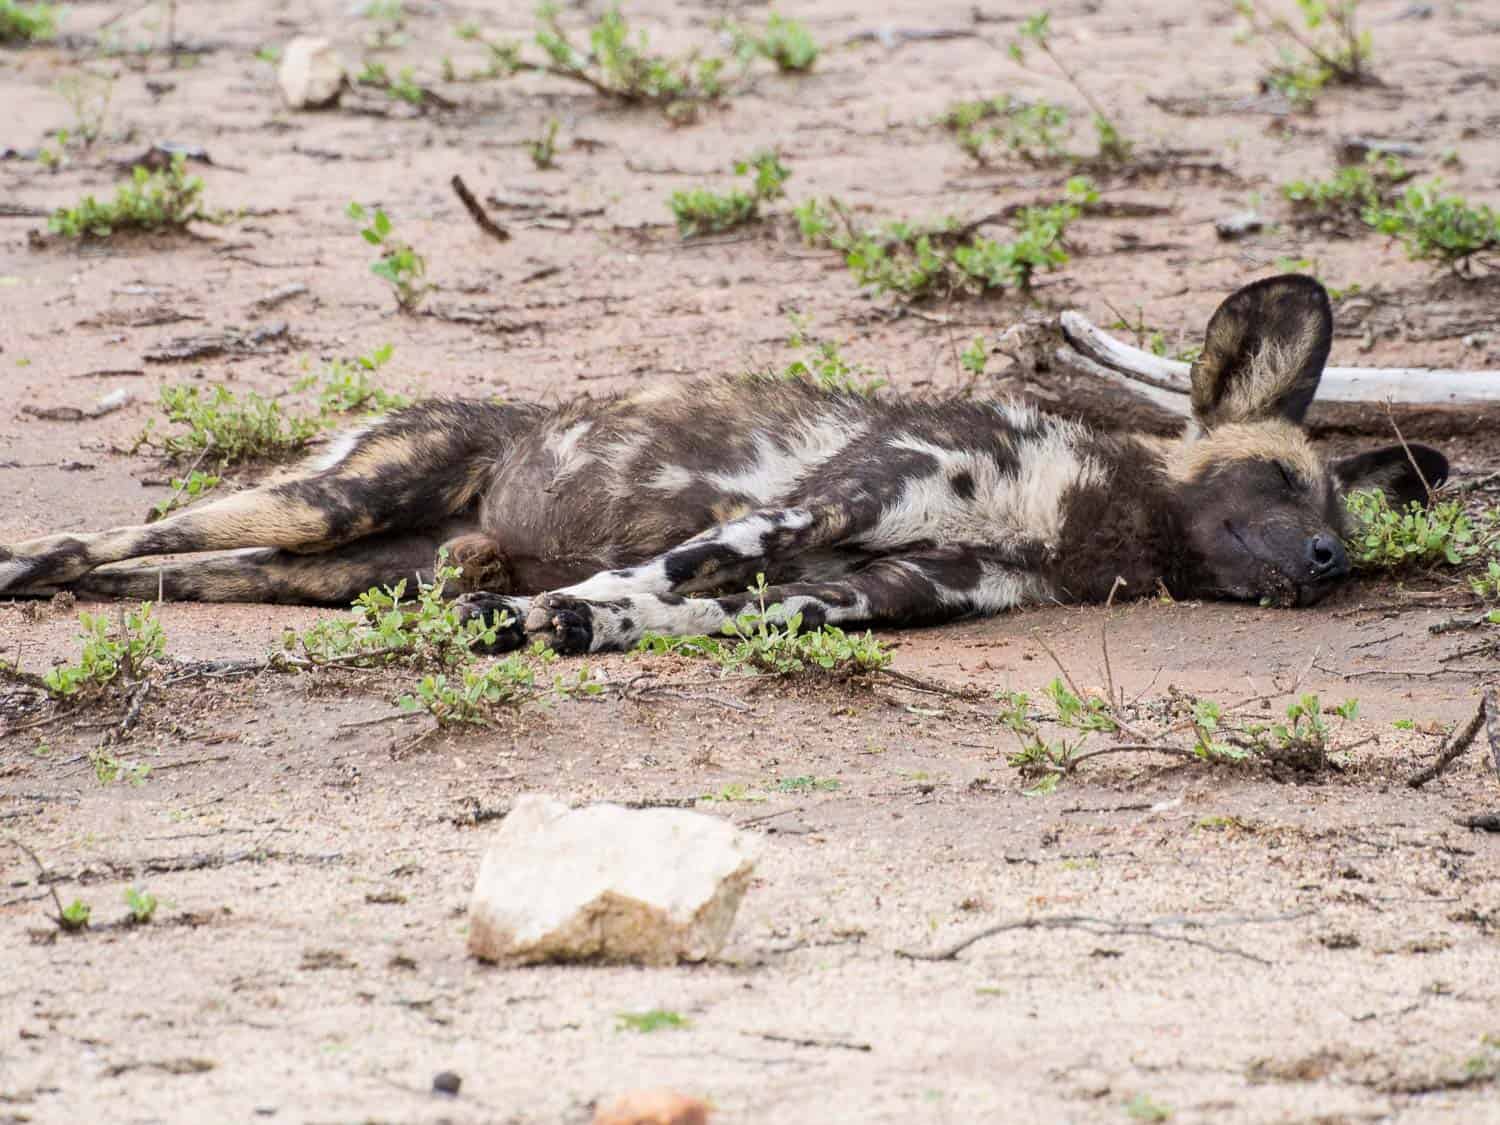 A rare African wild dog sleeping by the side of the road in Kruger National Park on a self-drive safari